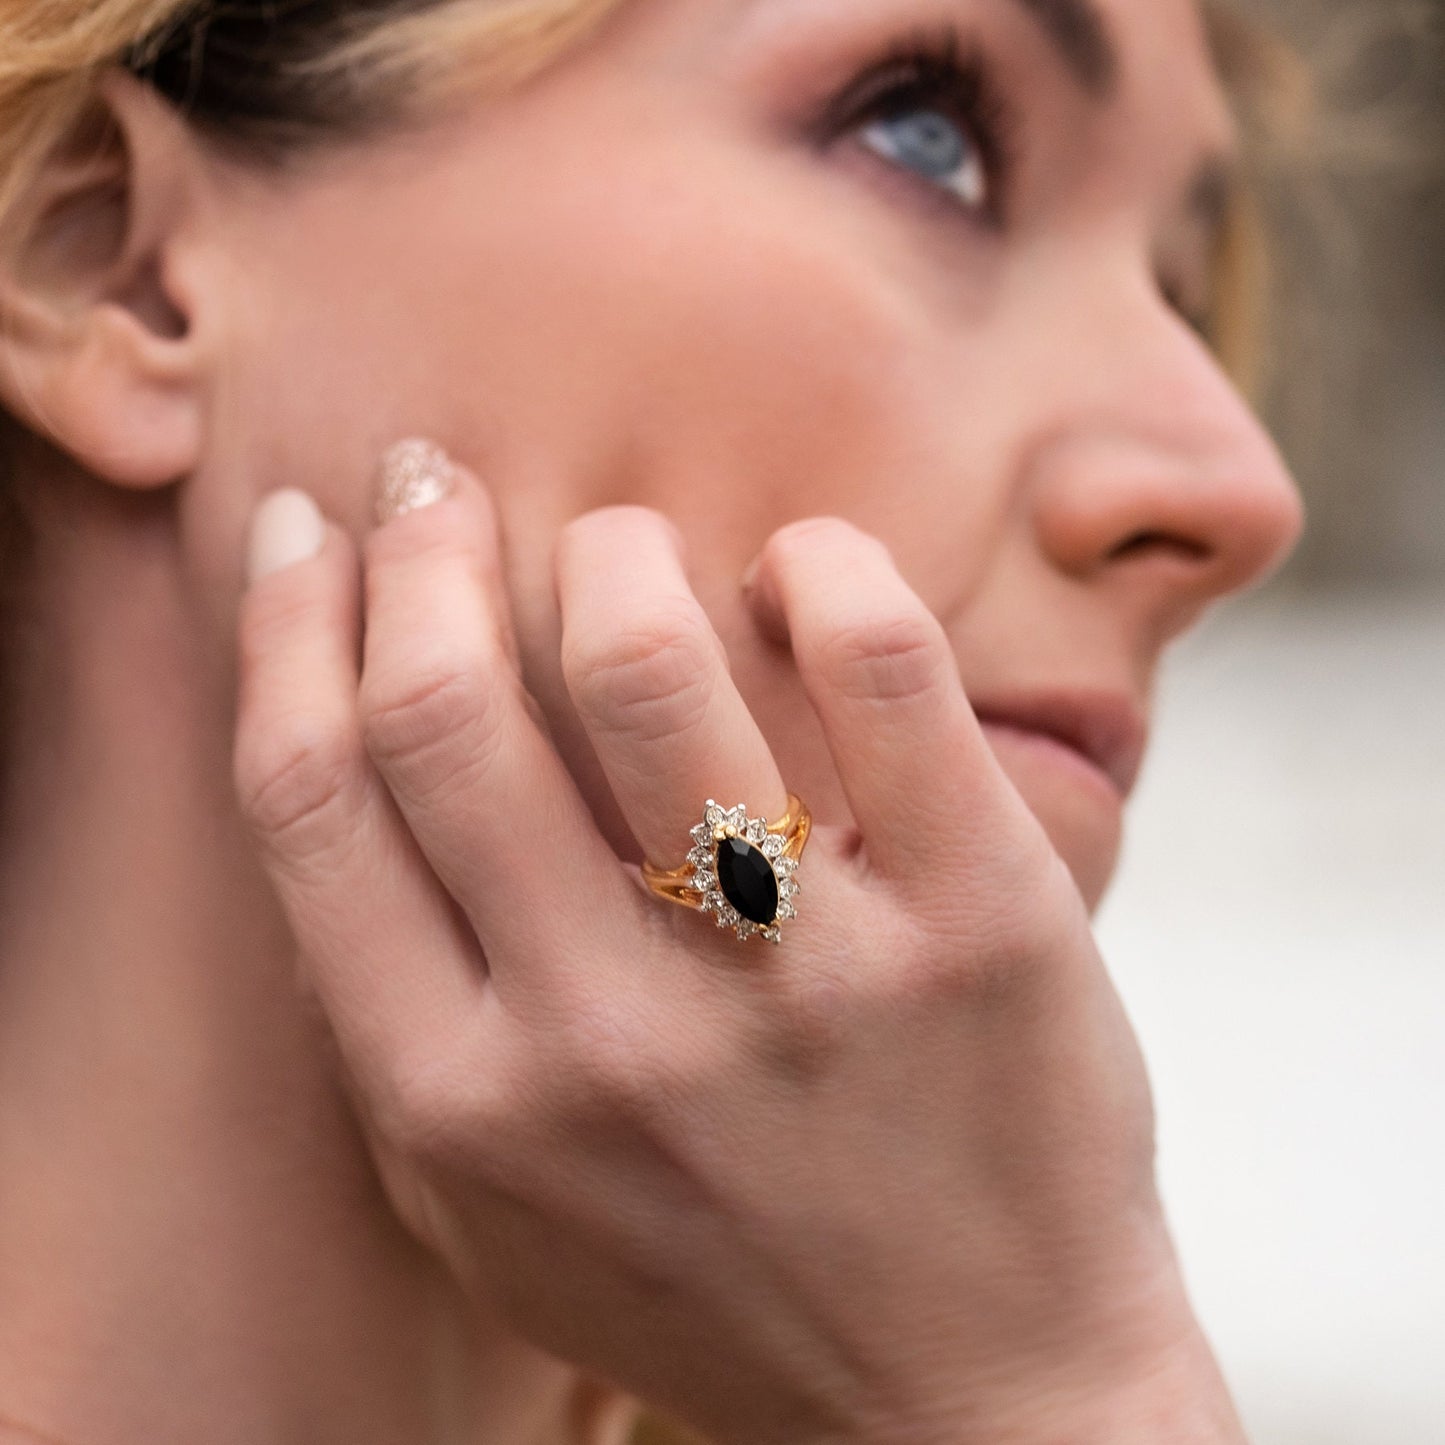 Vintage Ring Black and Clear Swarovski Crystals 18k Gold Plated Ring R1891 - Limited Stock - Never Worn